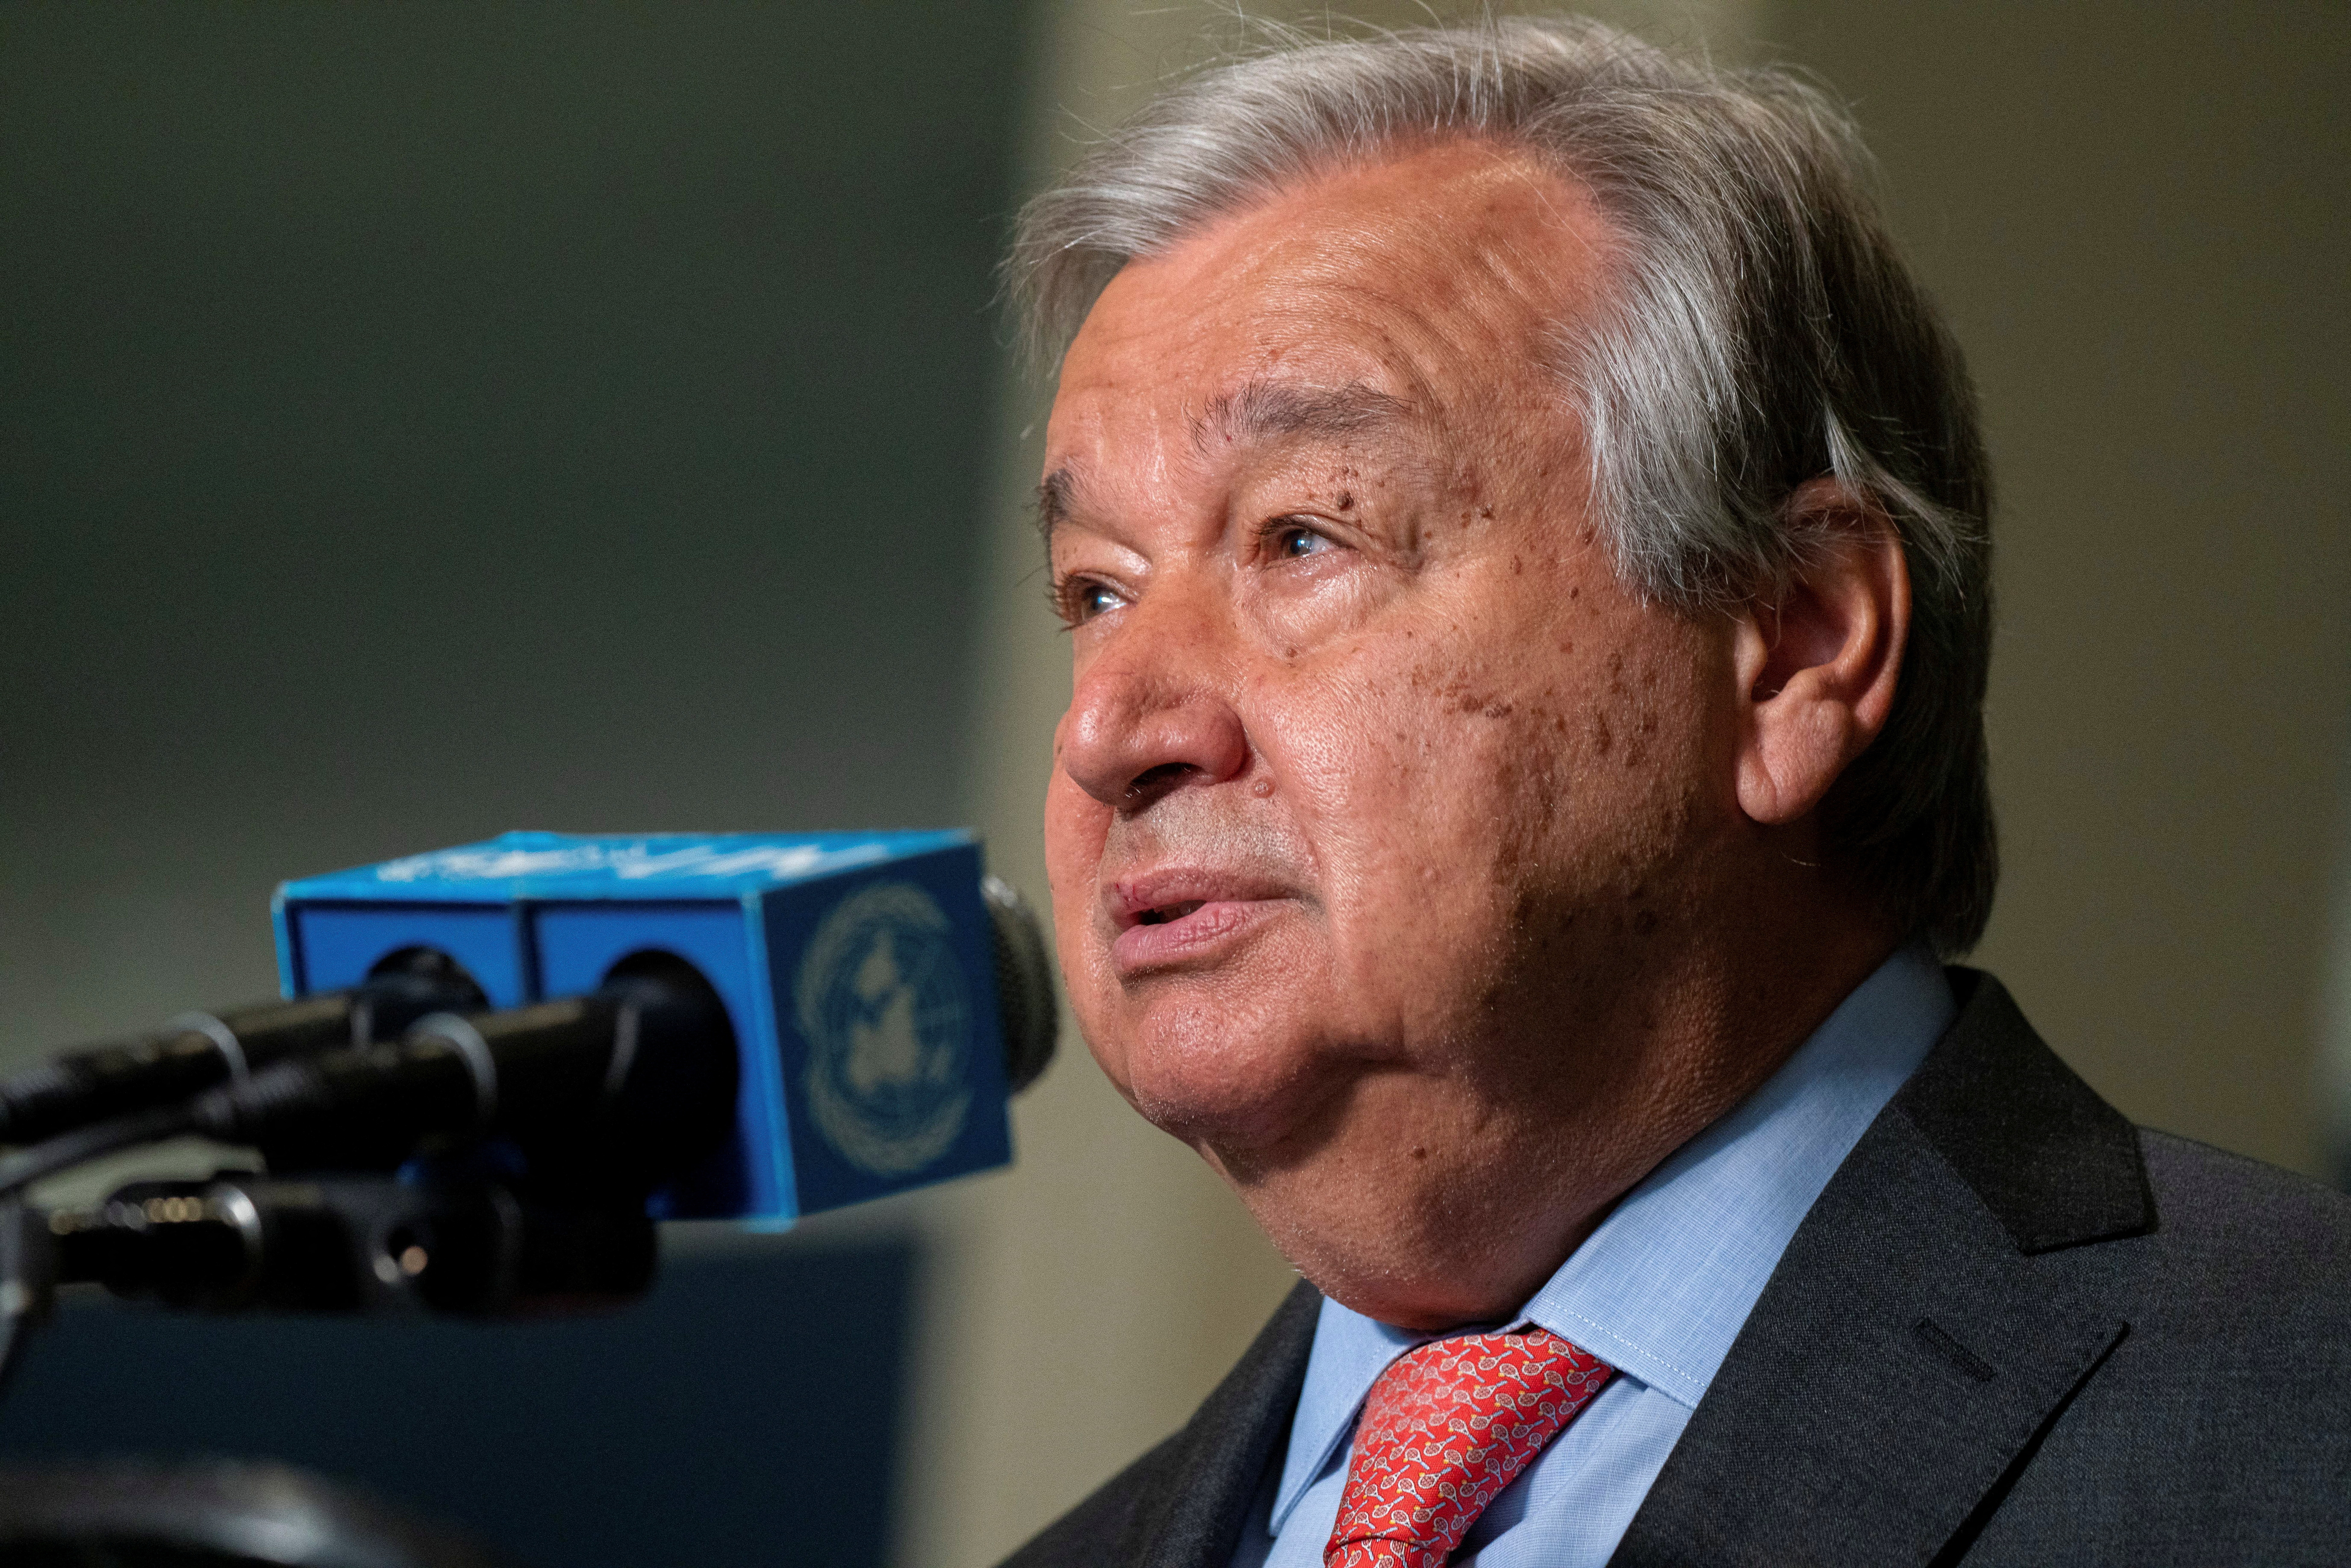 UN Secretary-General Guterres addresses media prior to Nuclear Non-Proliferation Treaty review conference in New York